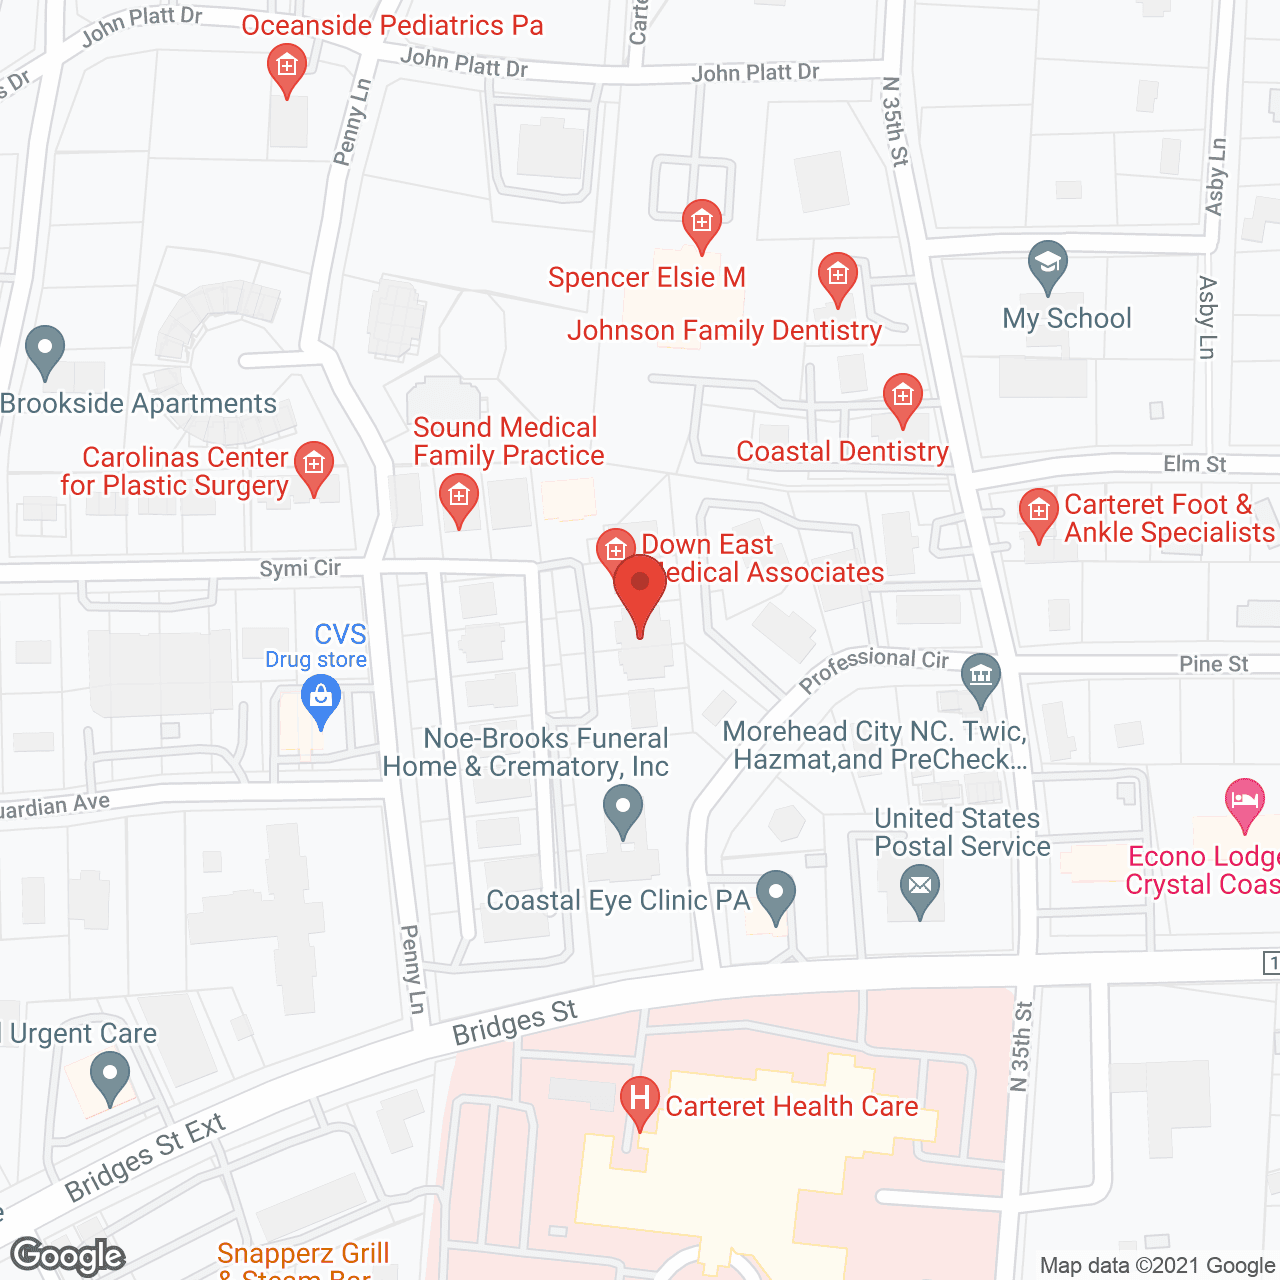 Raab Cancer Care Ctr in google map